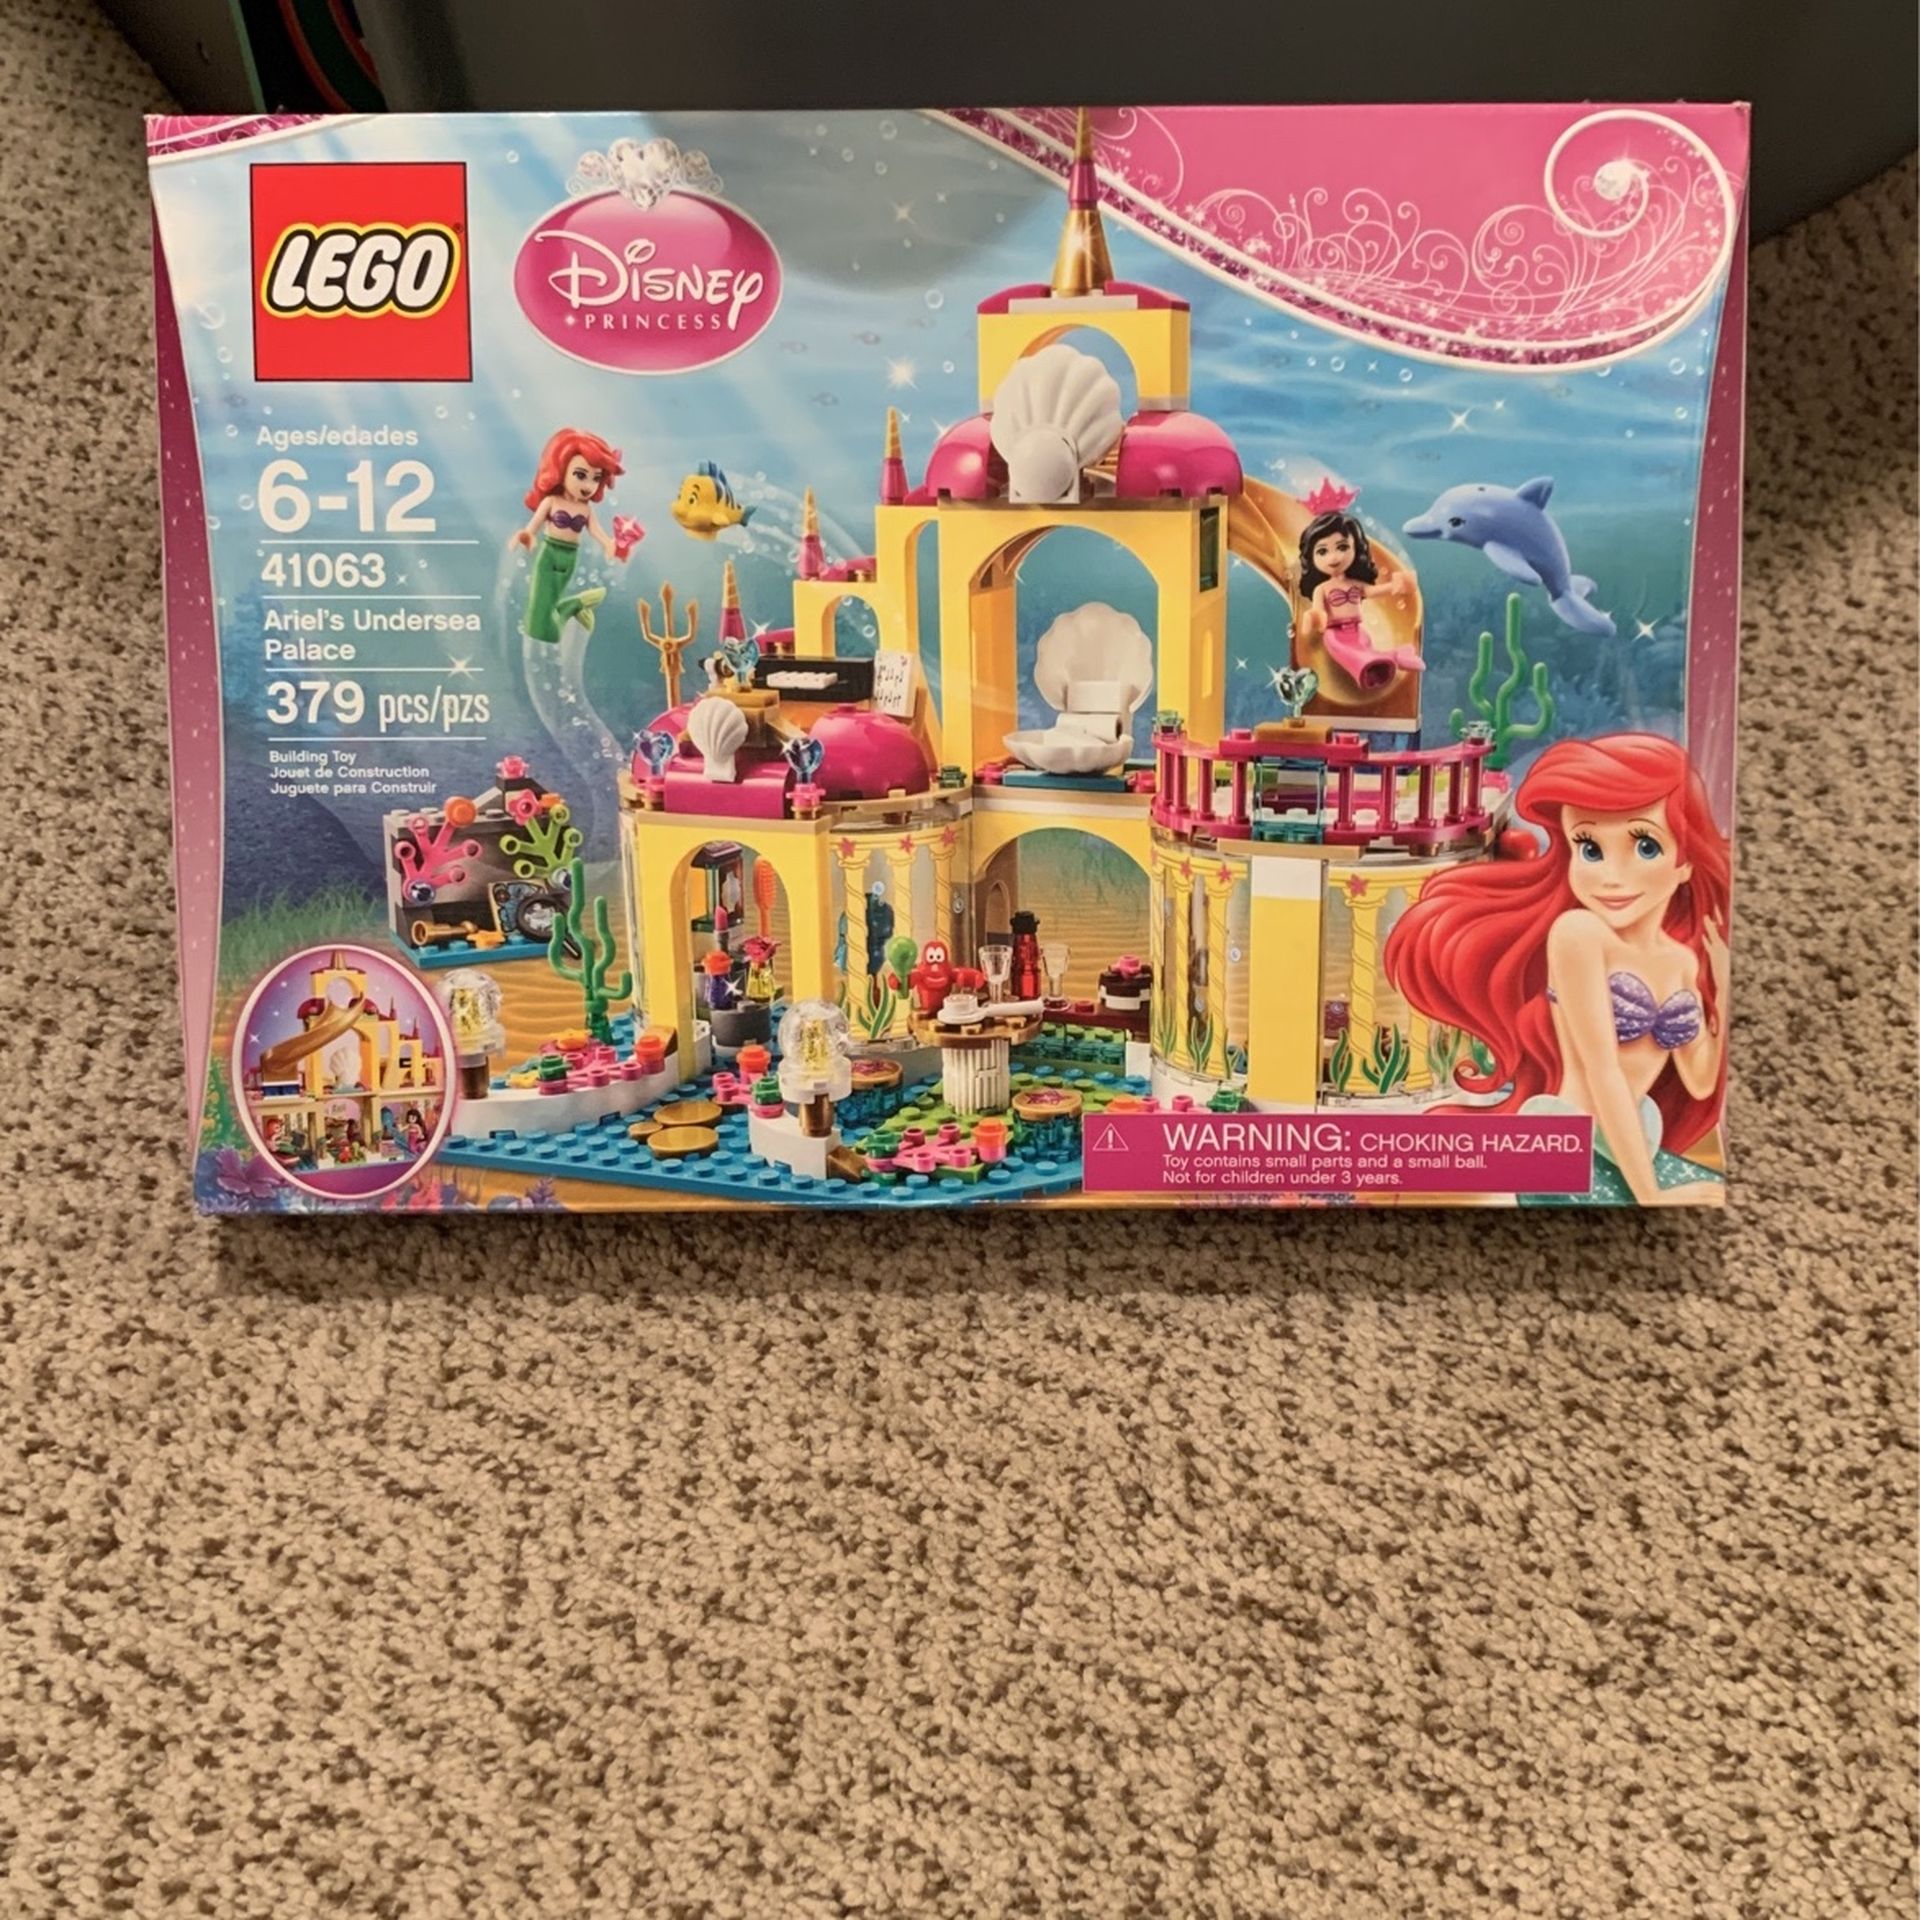 NEW - Lego Princess Undersea Palace - 41063 Sale in Itasca, IL - OfferUp